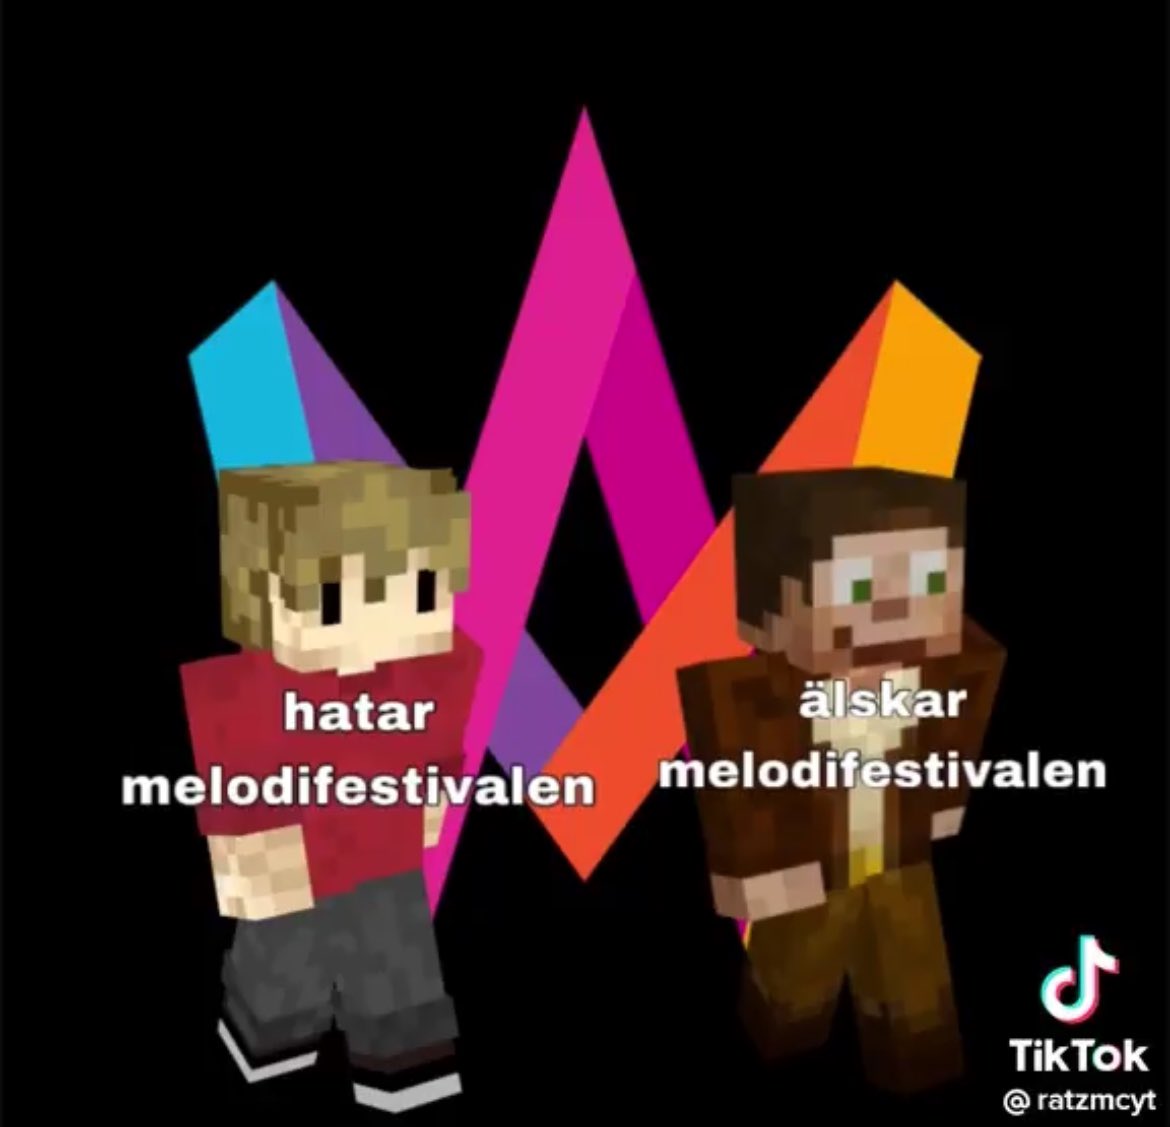 Actually Rat is so right with this headcanon, this is so real. Scar would love melodifestivalen